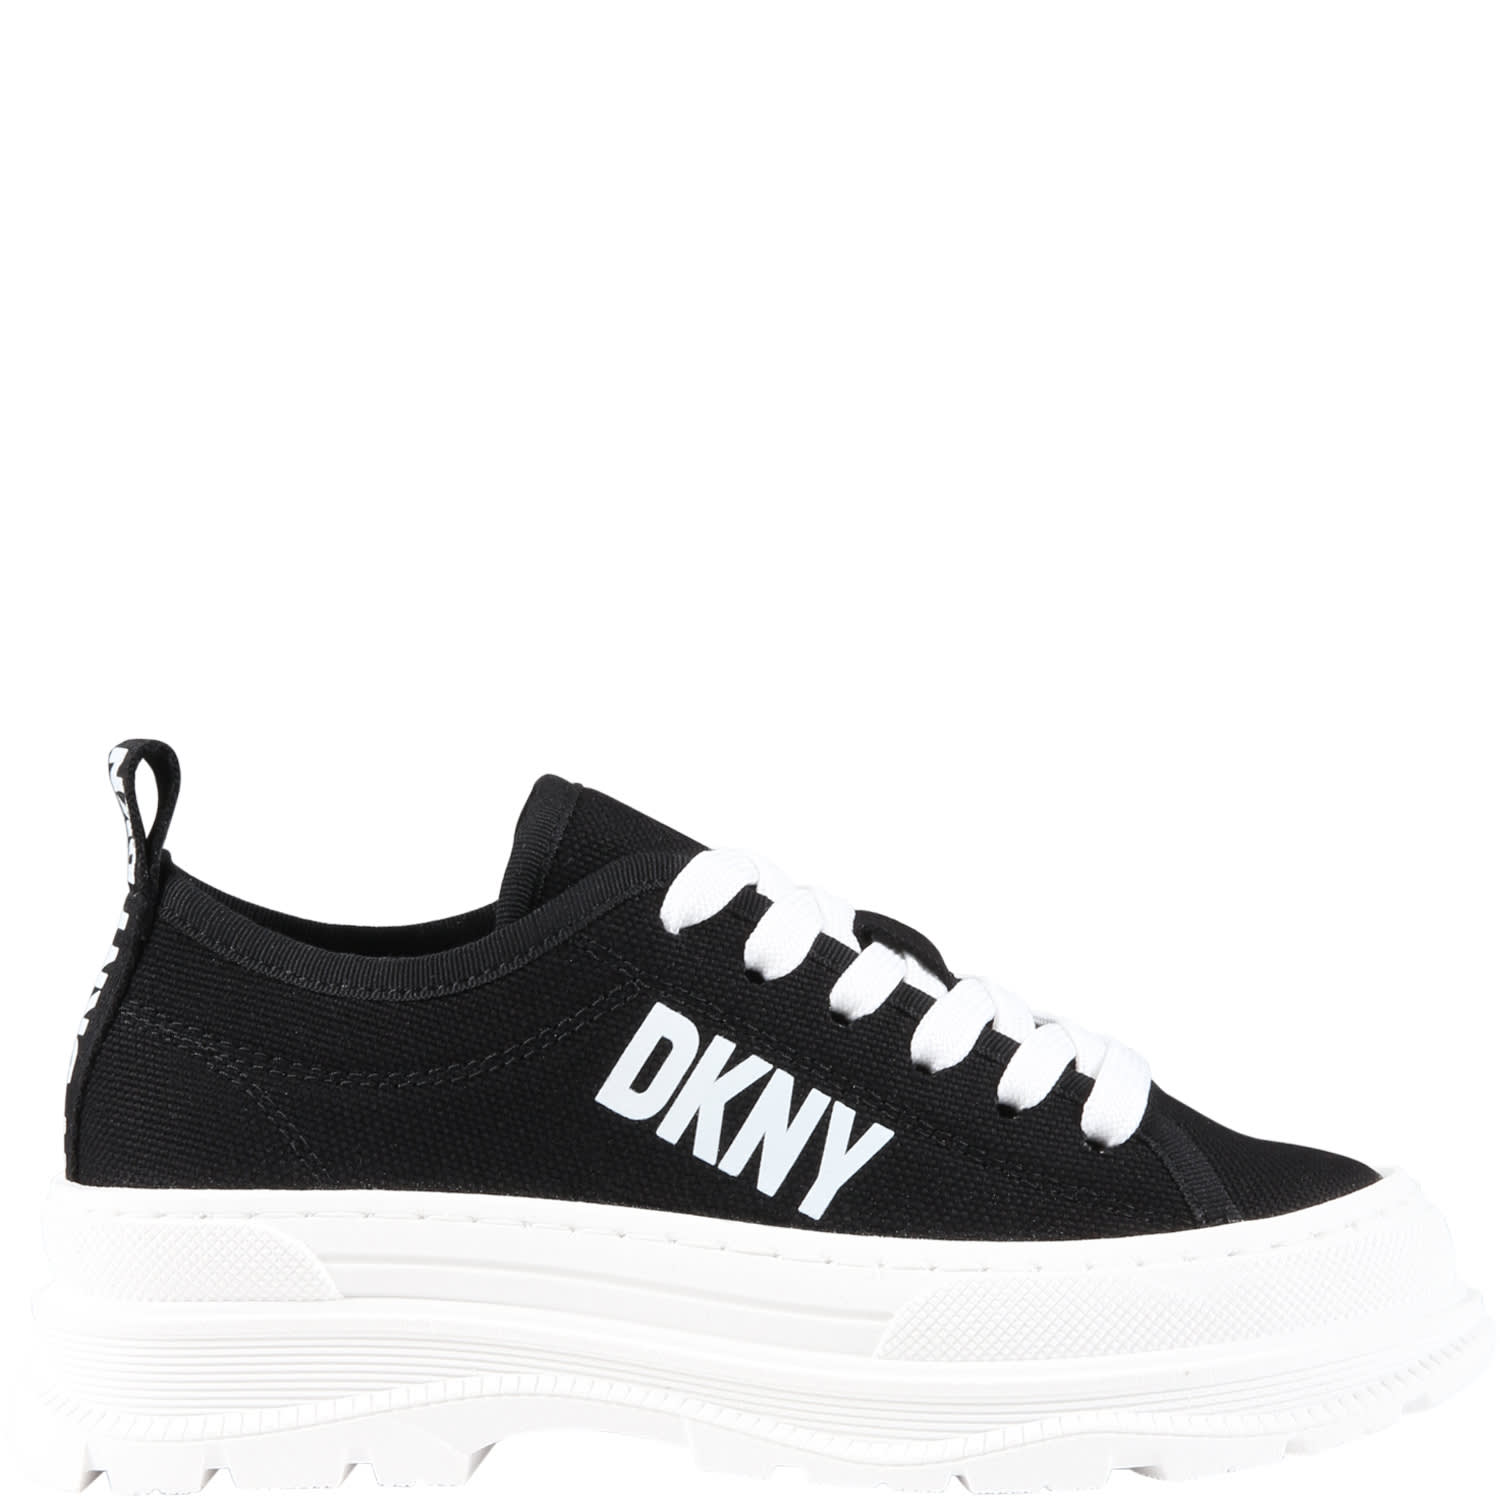 Dkny Kids' Black Sneakers For Girl With White Logo